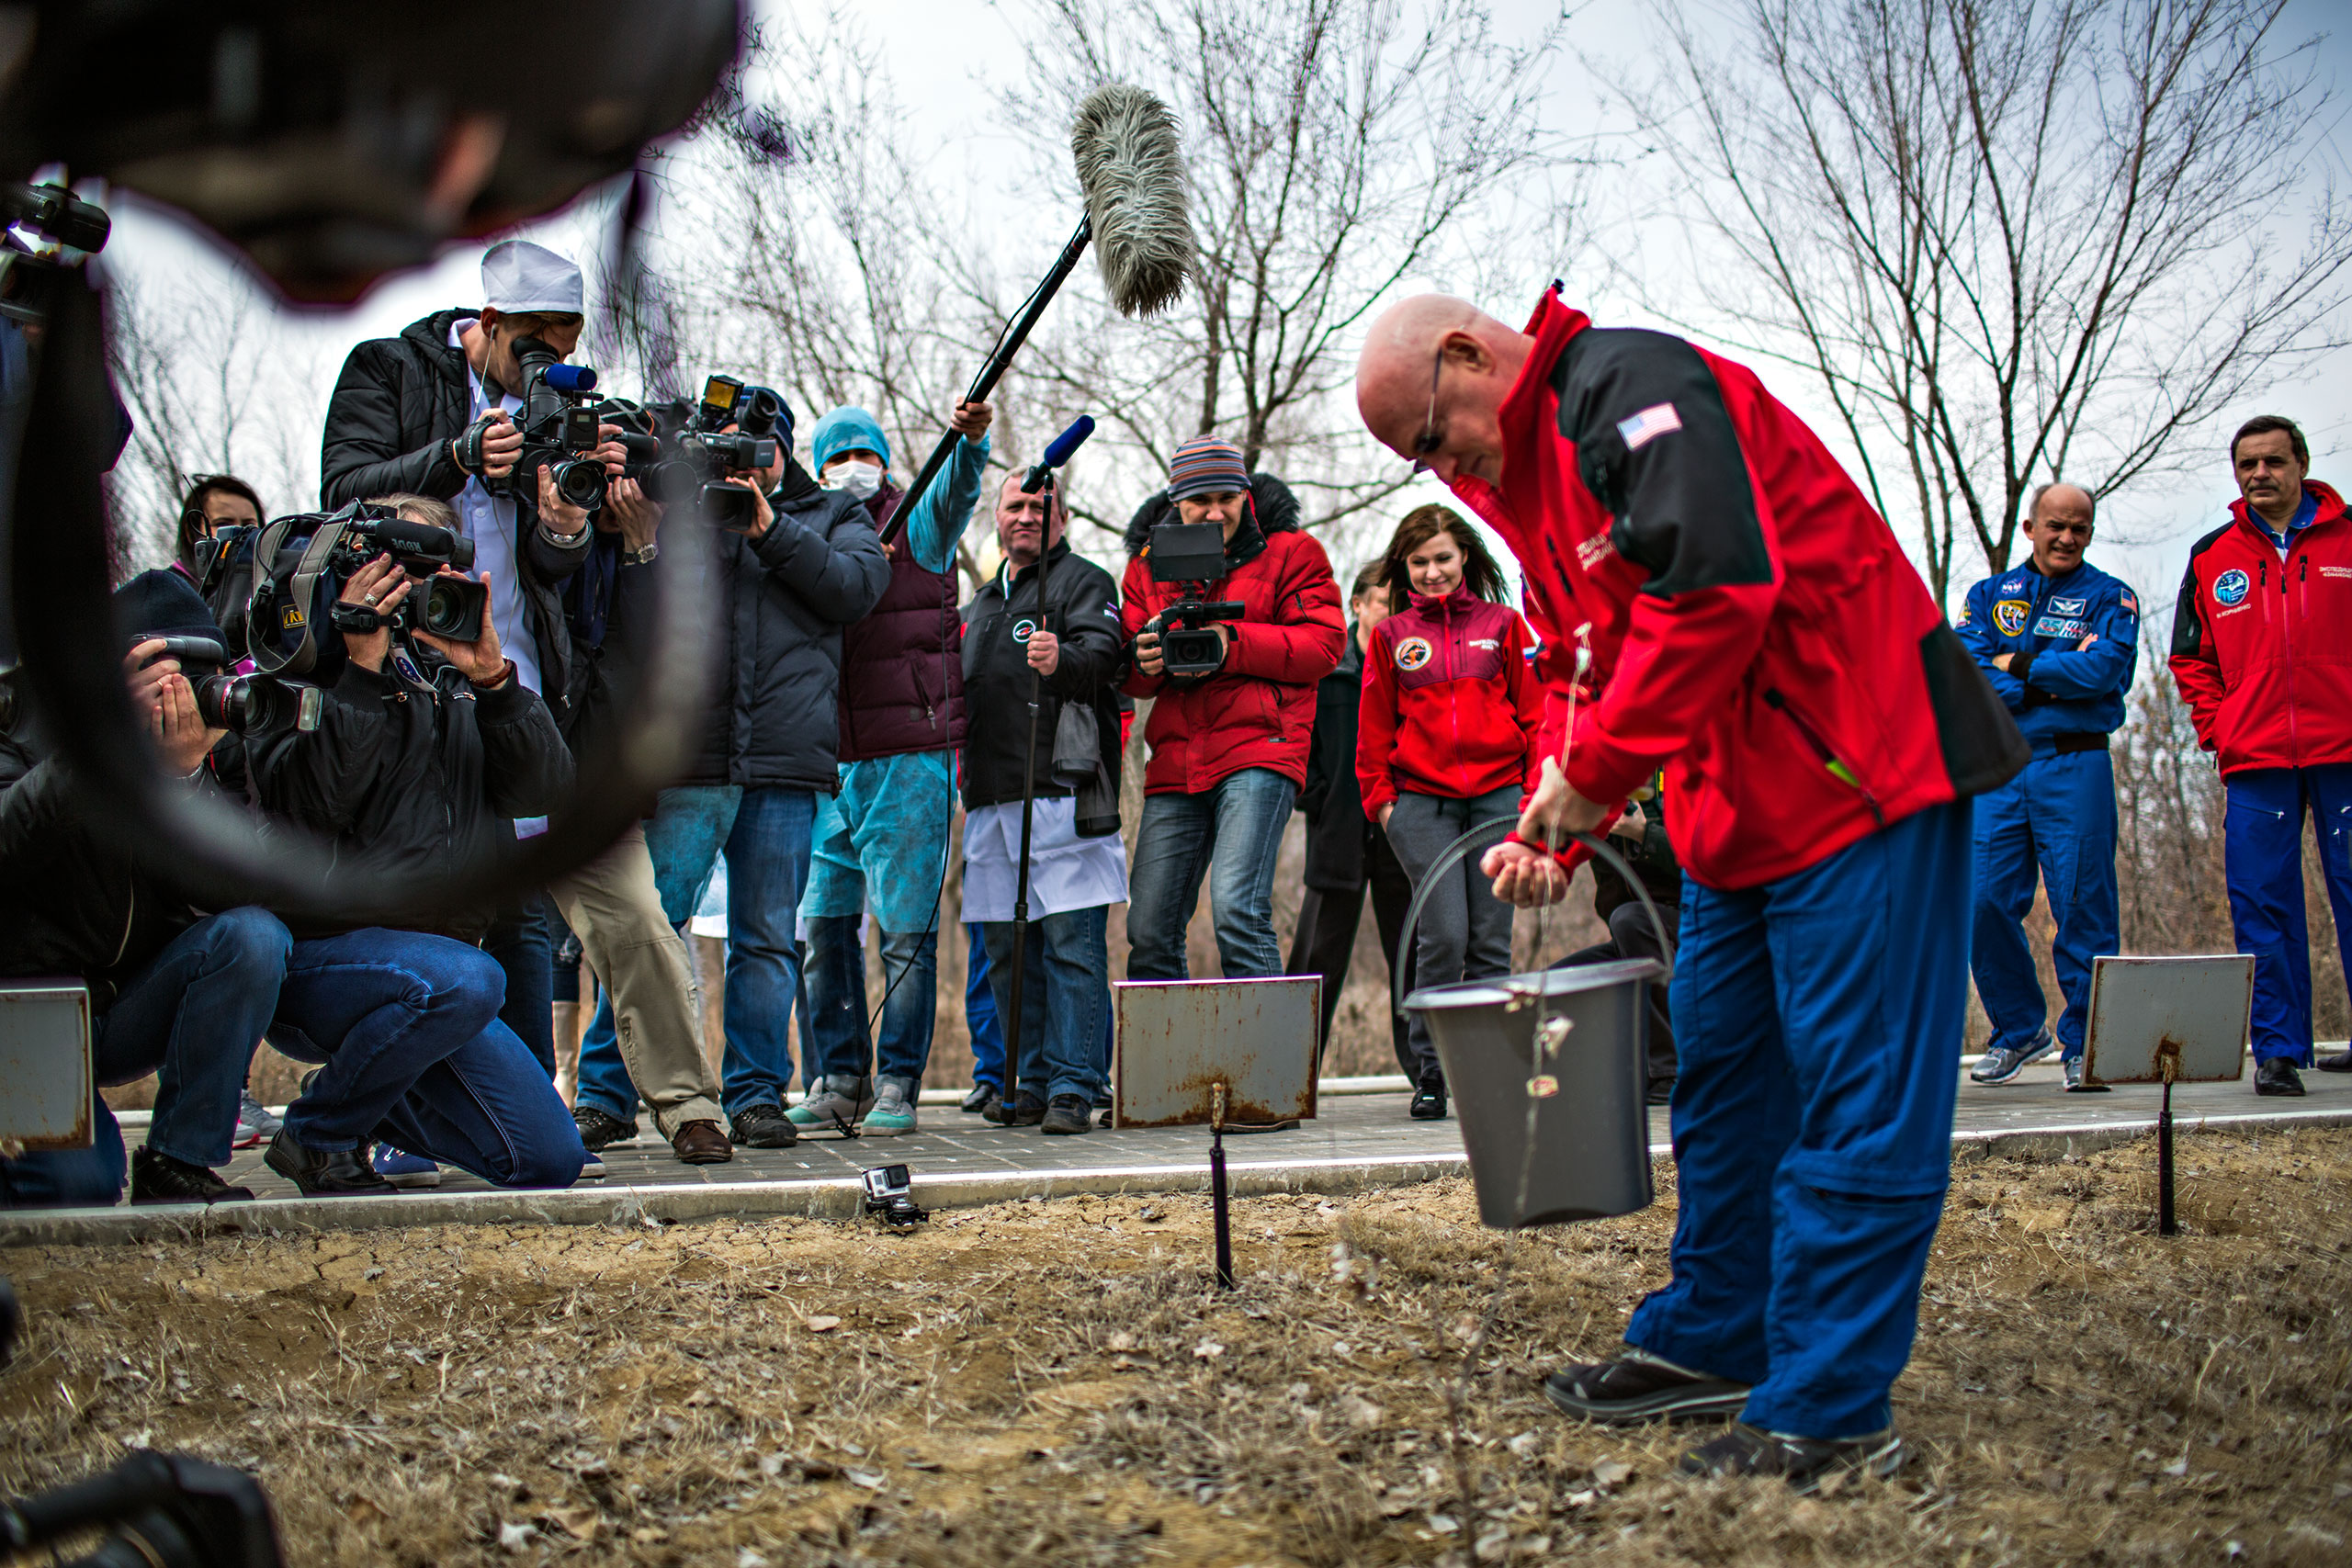 Scott Kelly waters the tree planted in his name in Baikonur, Kazhakstan on Saturday, March 21.